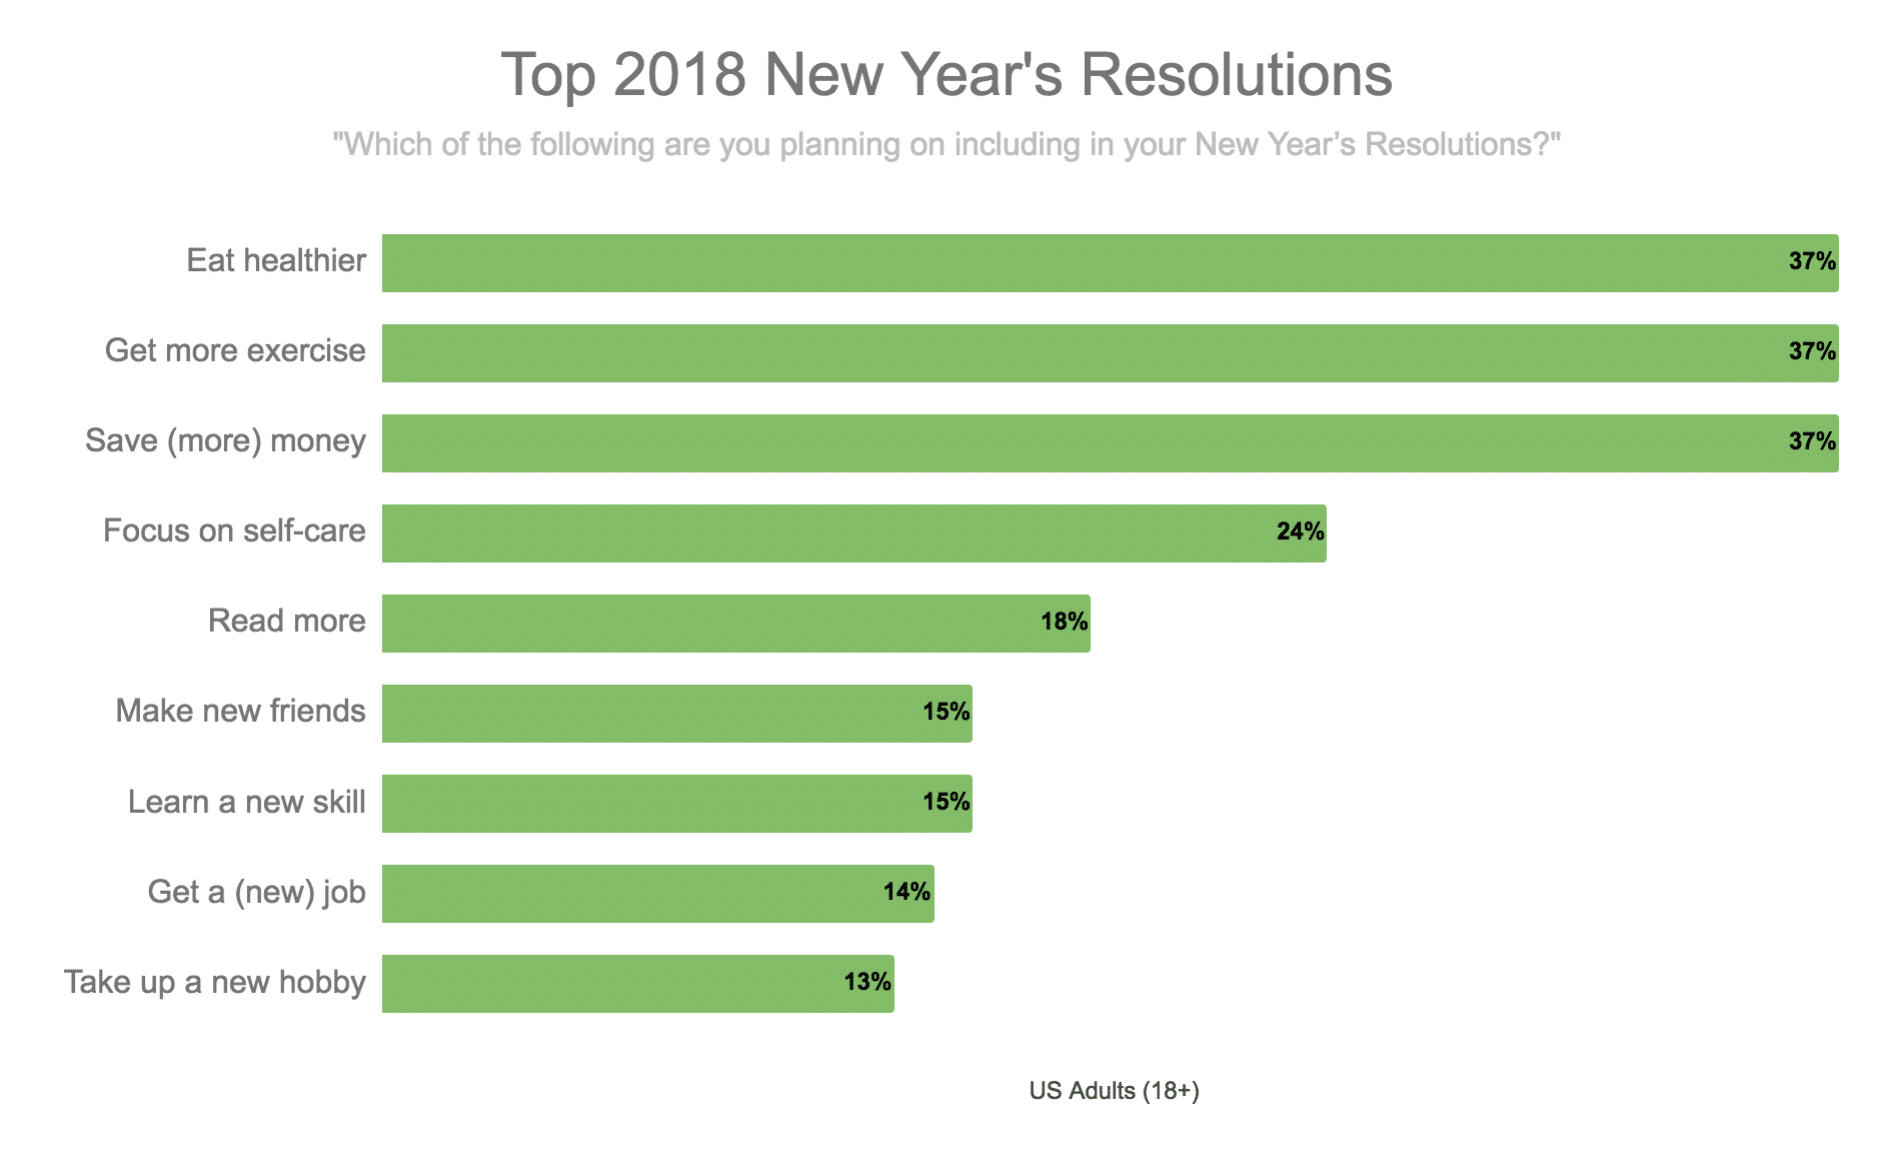 Top 2018 New Year's Resolutions